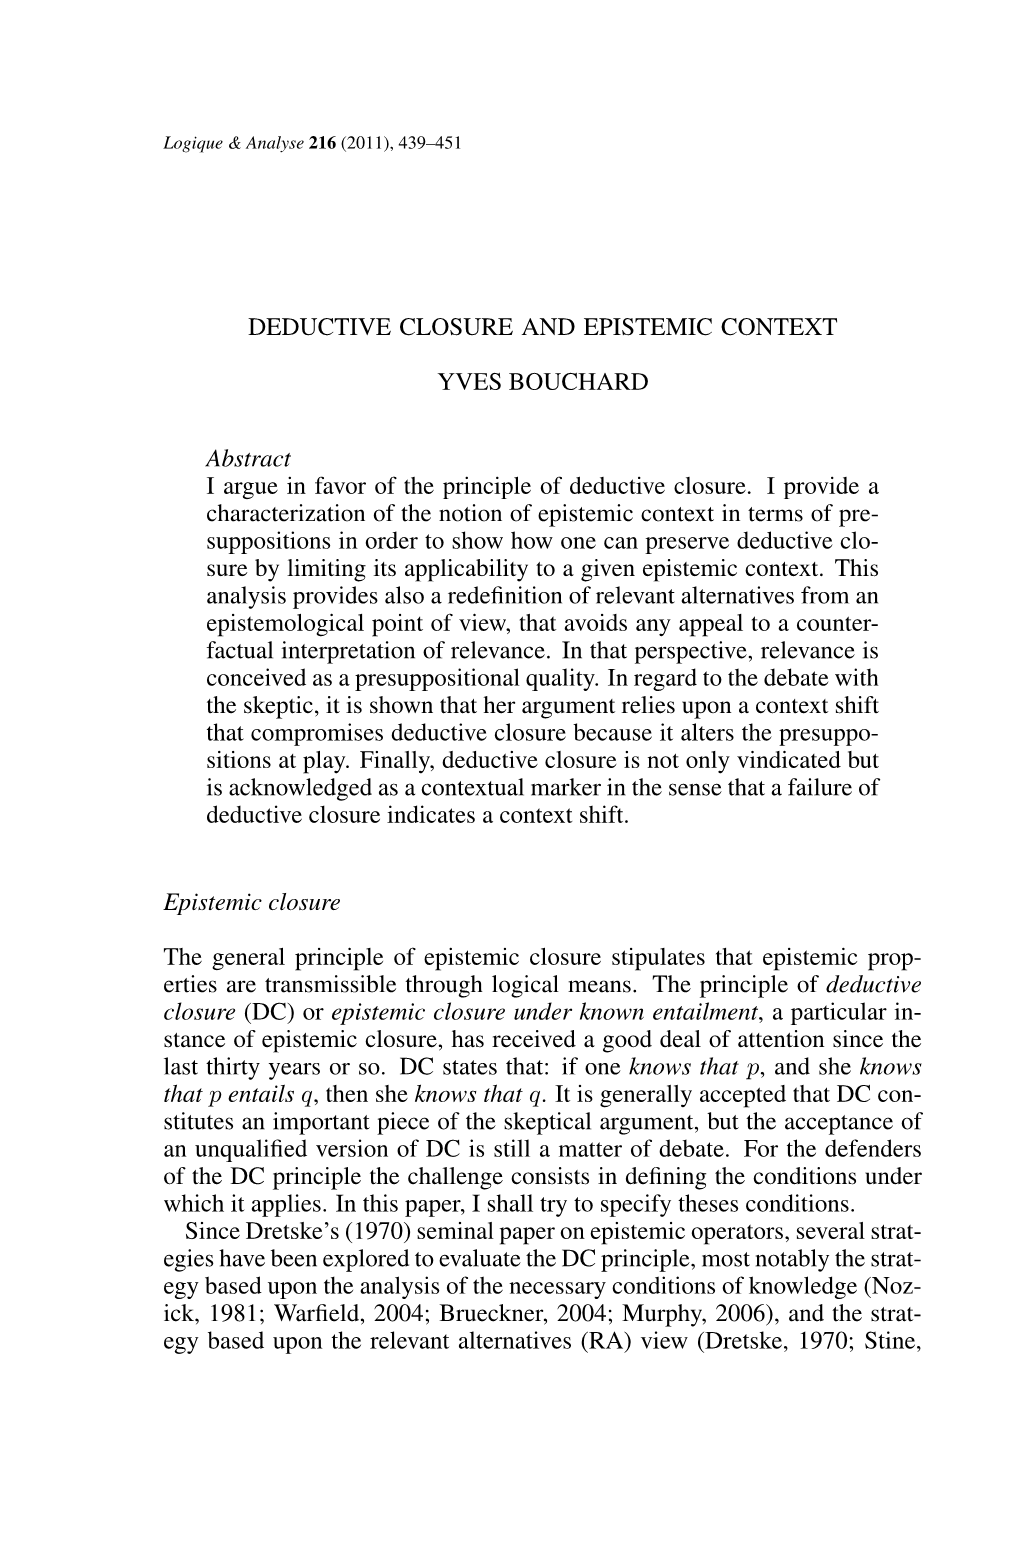 Page 439 DEDUCTIVE CLOSURE and EPISTEMIC CONTEXT YVES